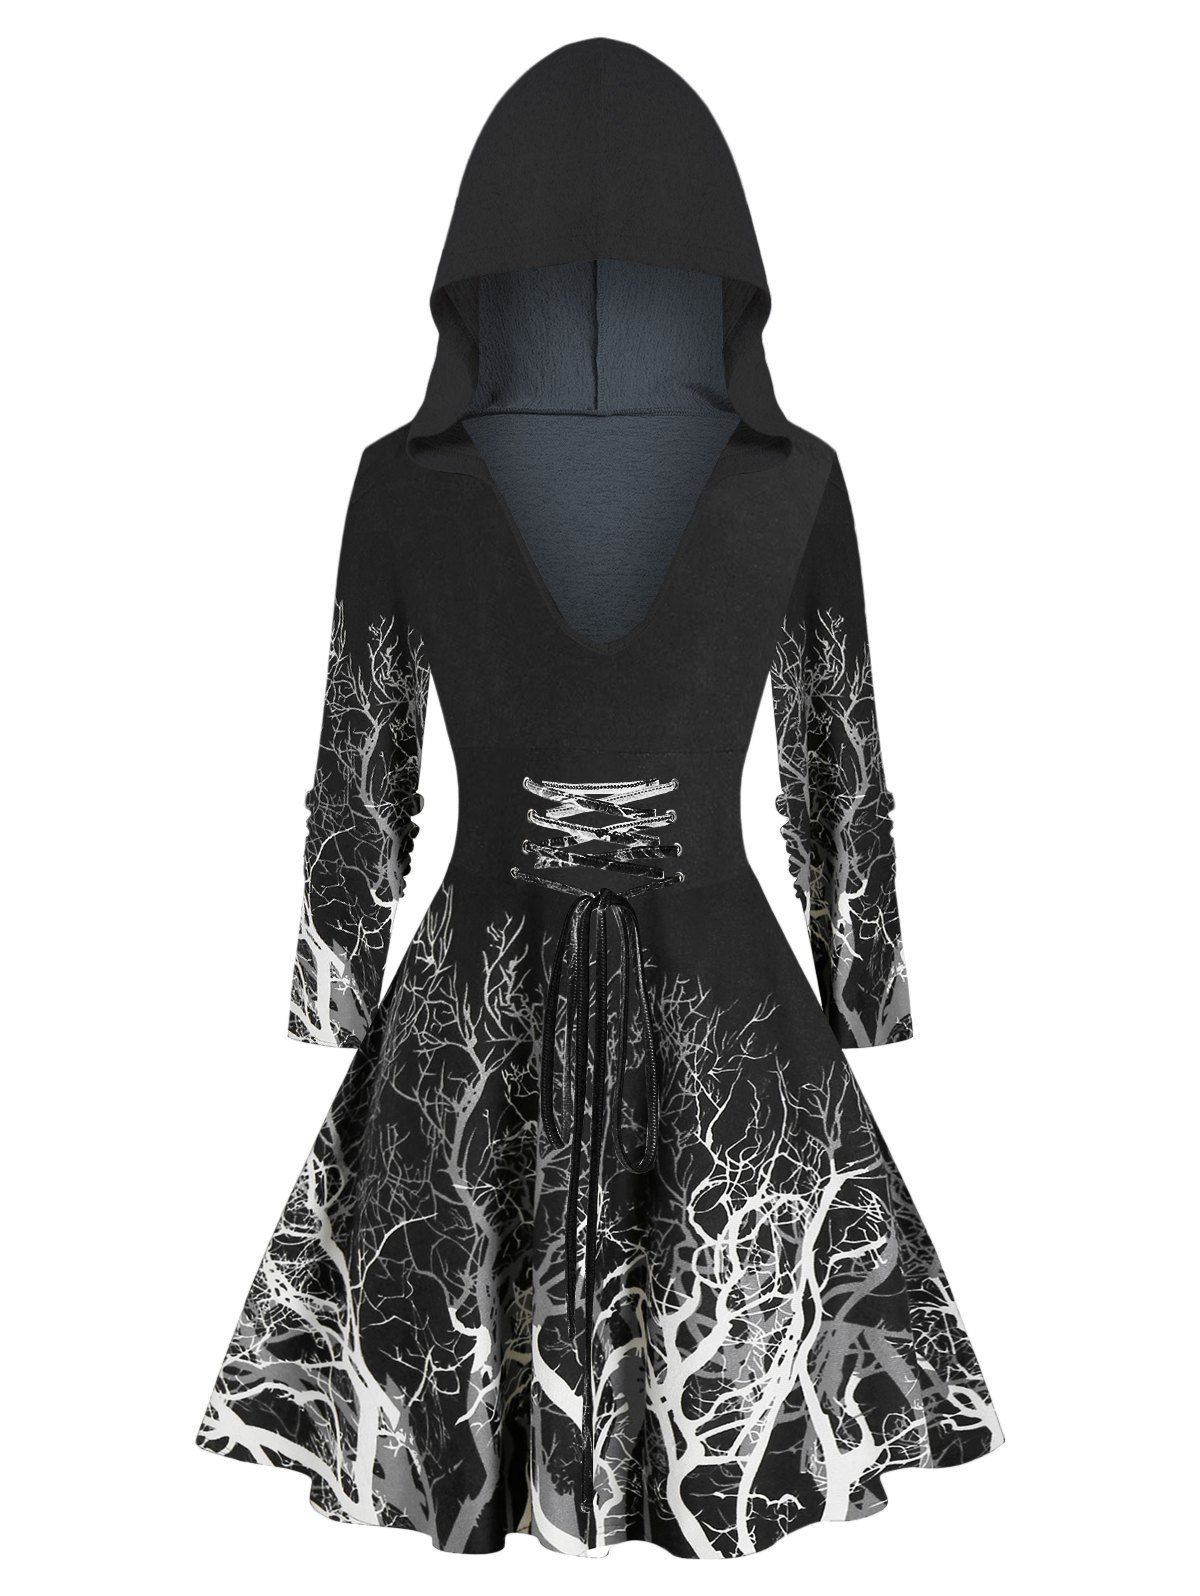 Tree Branch Pattern Hooded Lace-up Sweater Dress - BLACK S